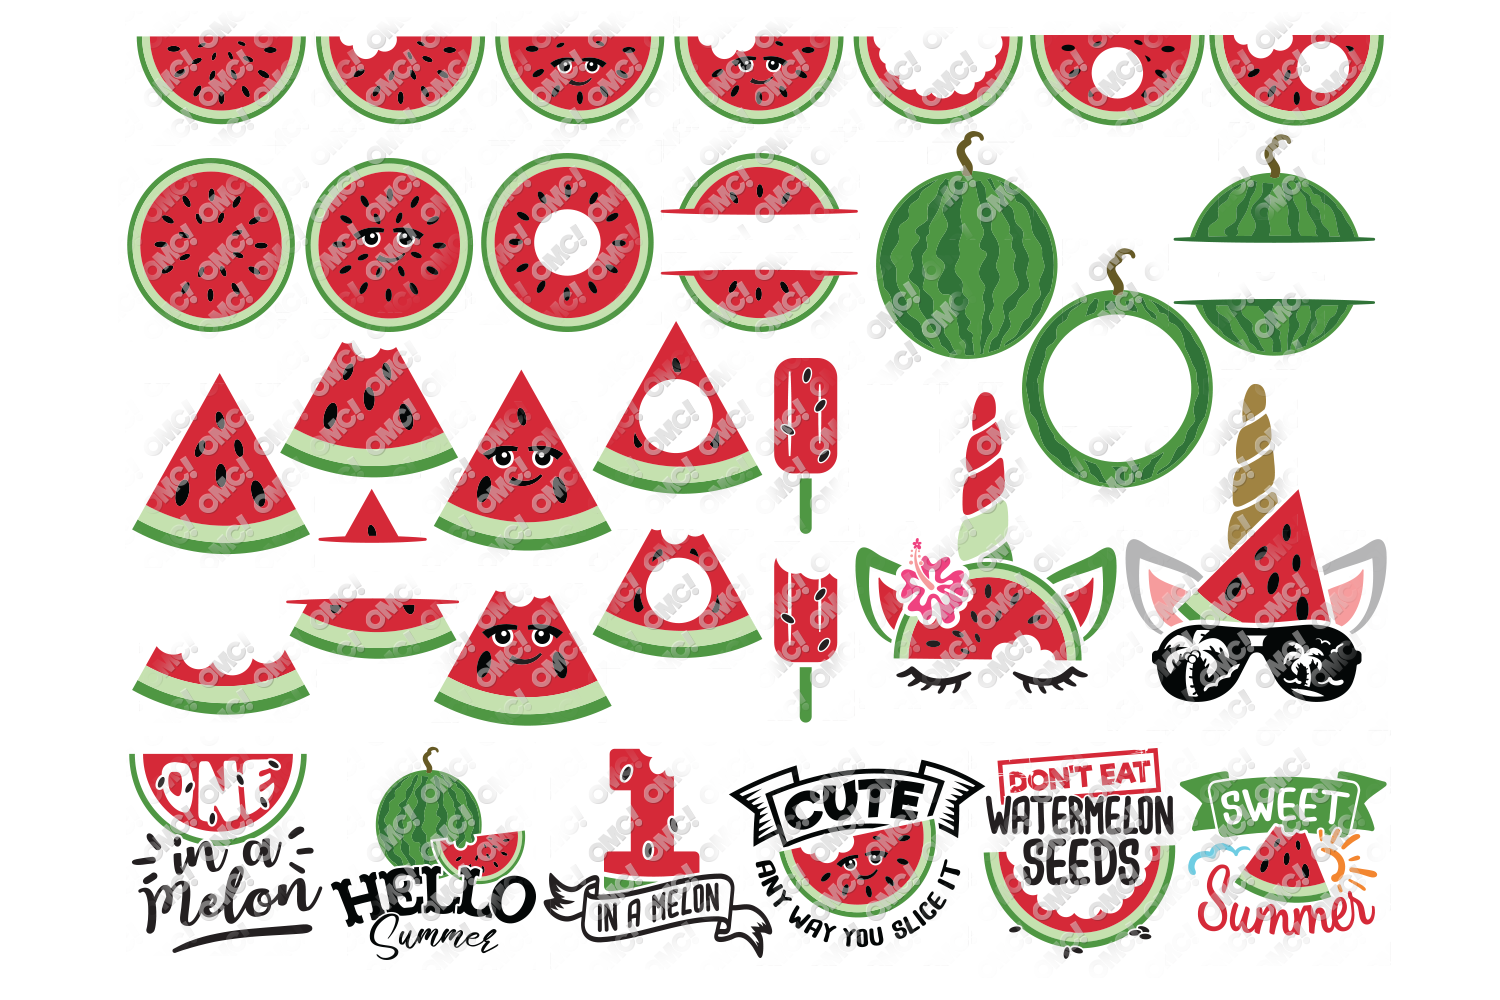 Download Watermelon SVG Monogram Quotes in SVG, DXF, PNG, EPS, JPG